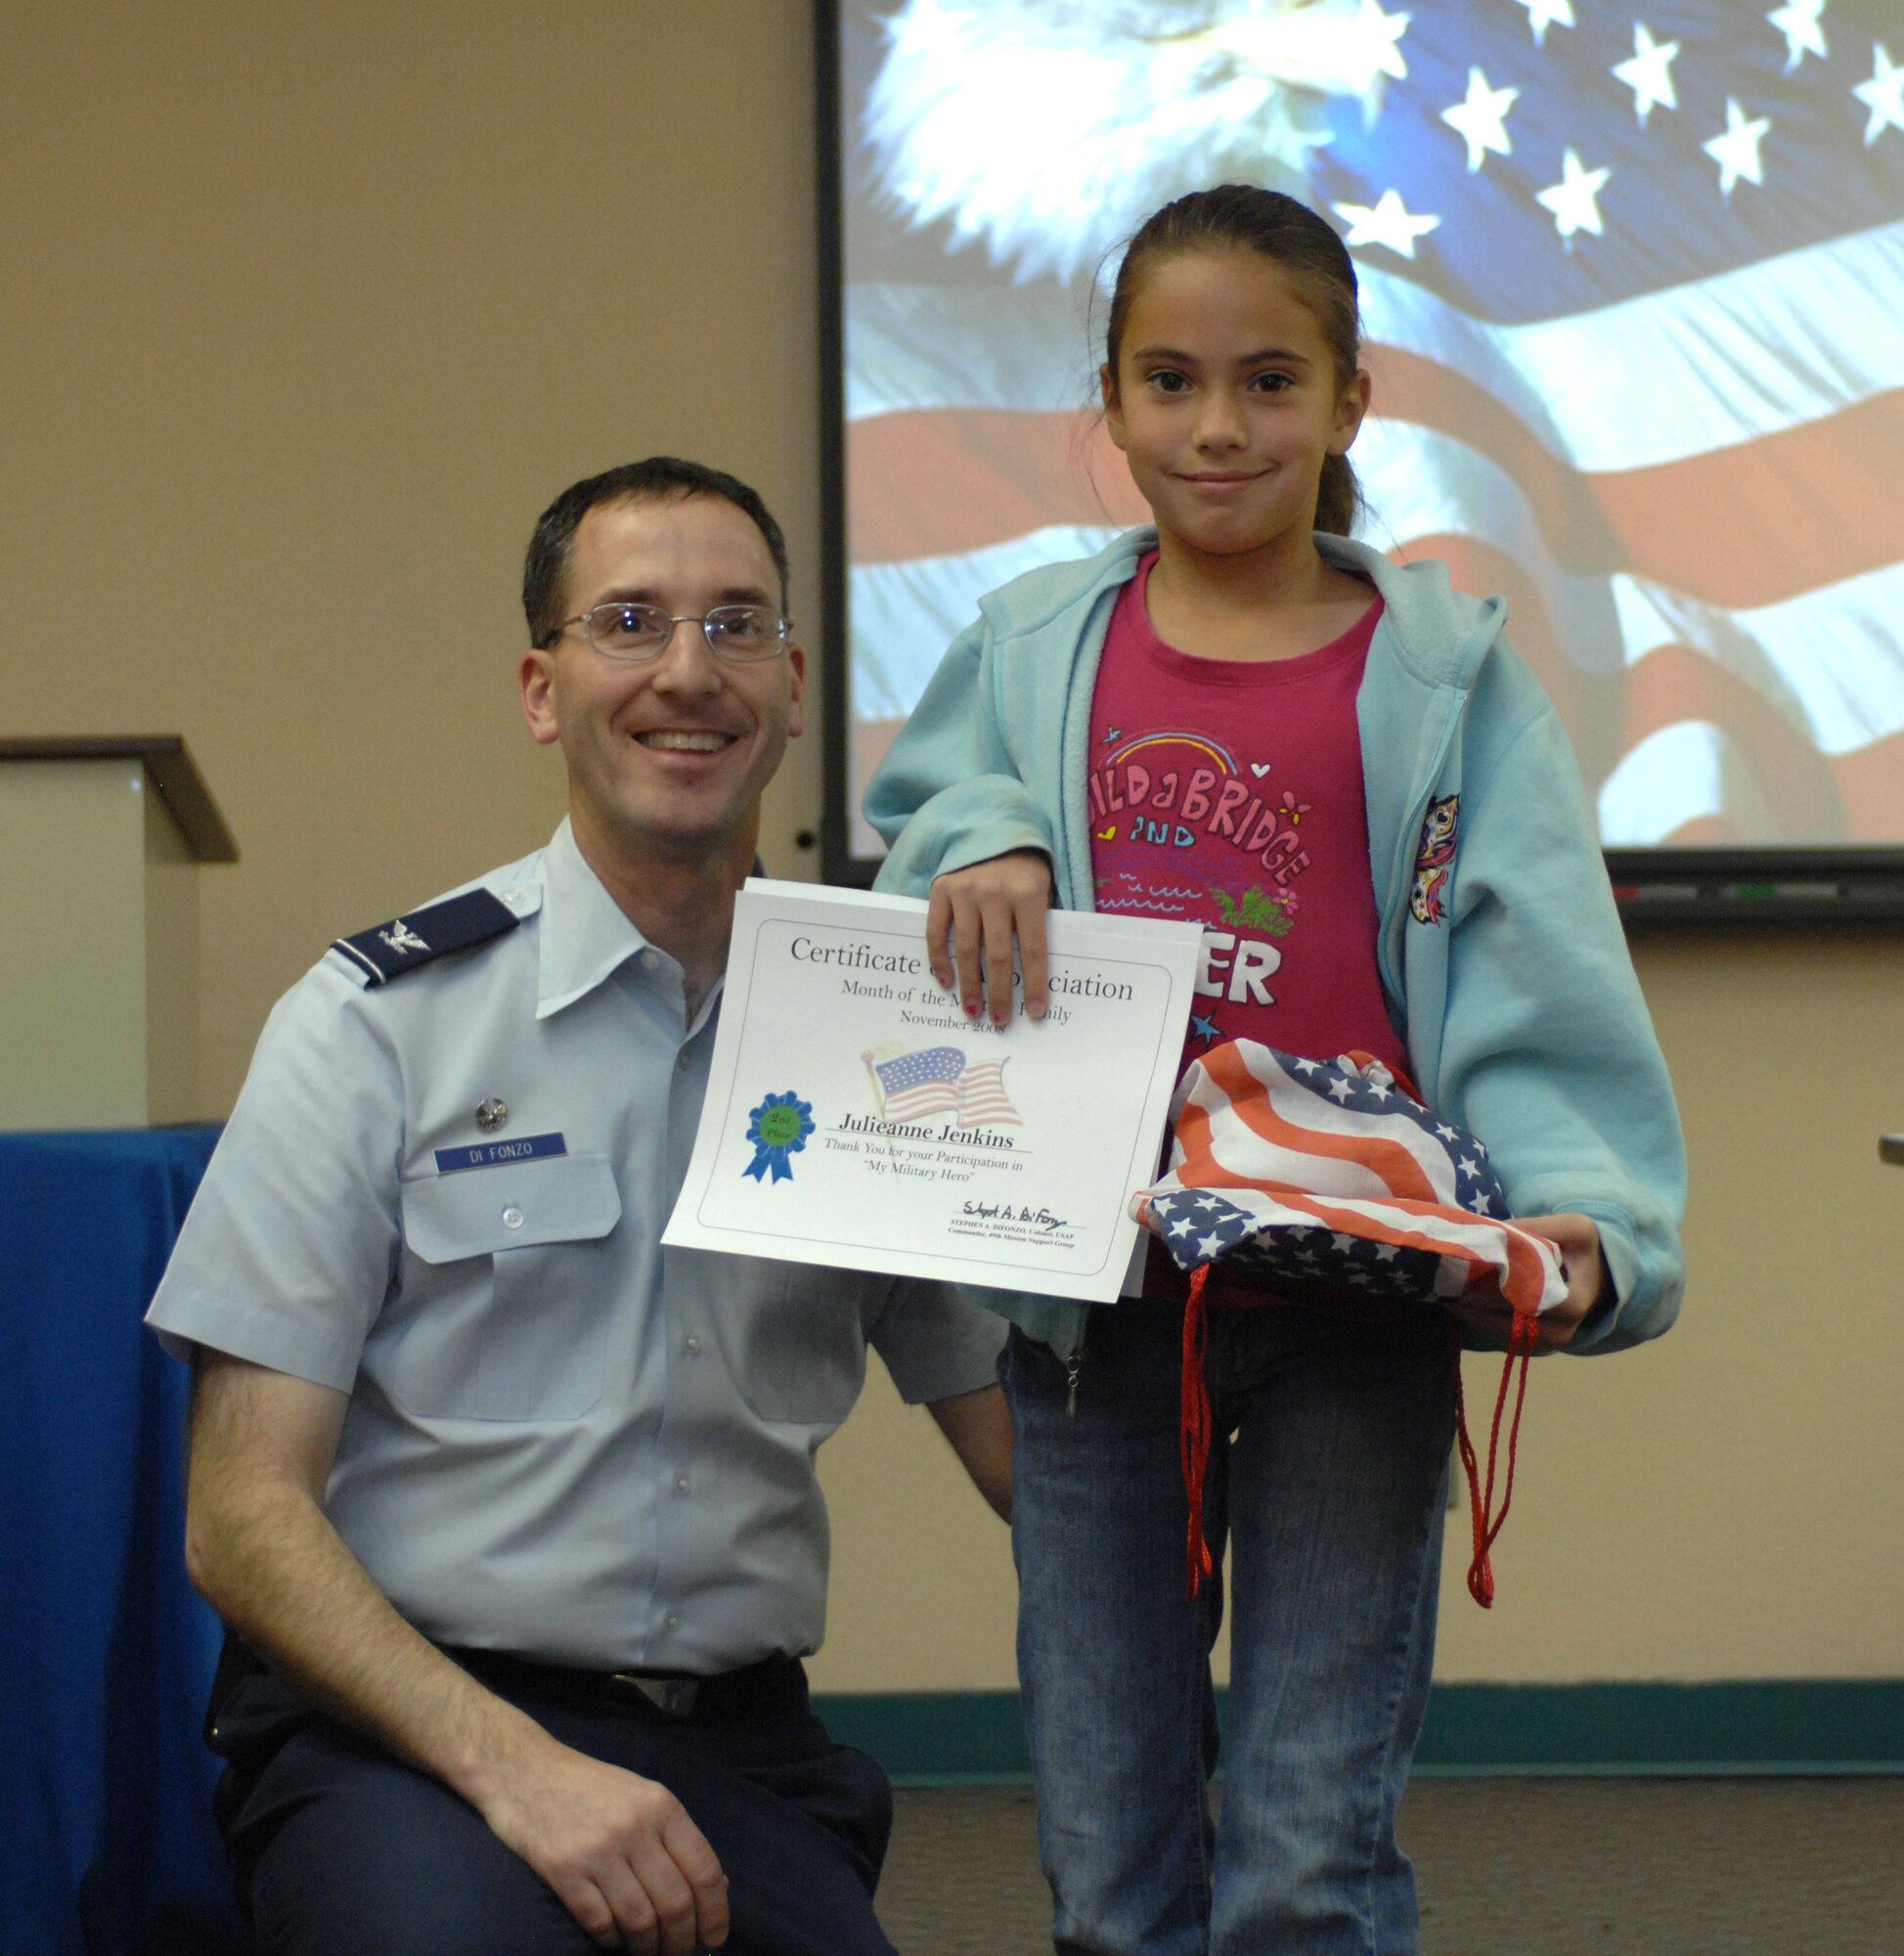 Col. Stephen DiFonzo, 49th Mission Support Group commander, presents an award to Julieanne Jenkins for winning 2nd place in the 7 - 12 year old category of the drawing contest at the Airman and Family Readiness Center at Holloman Air Force Base, N.M., Nov. 24. The theme for the drawing contest was "My Military Hero" in support of Military Family Appreciation Month. (U.S. Air Force photo/Airman Sondra M. Escutia)